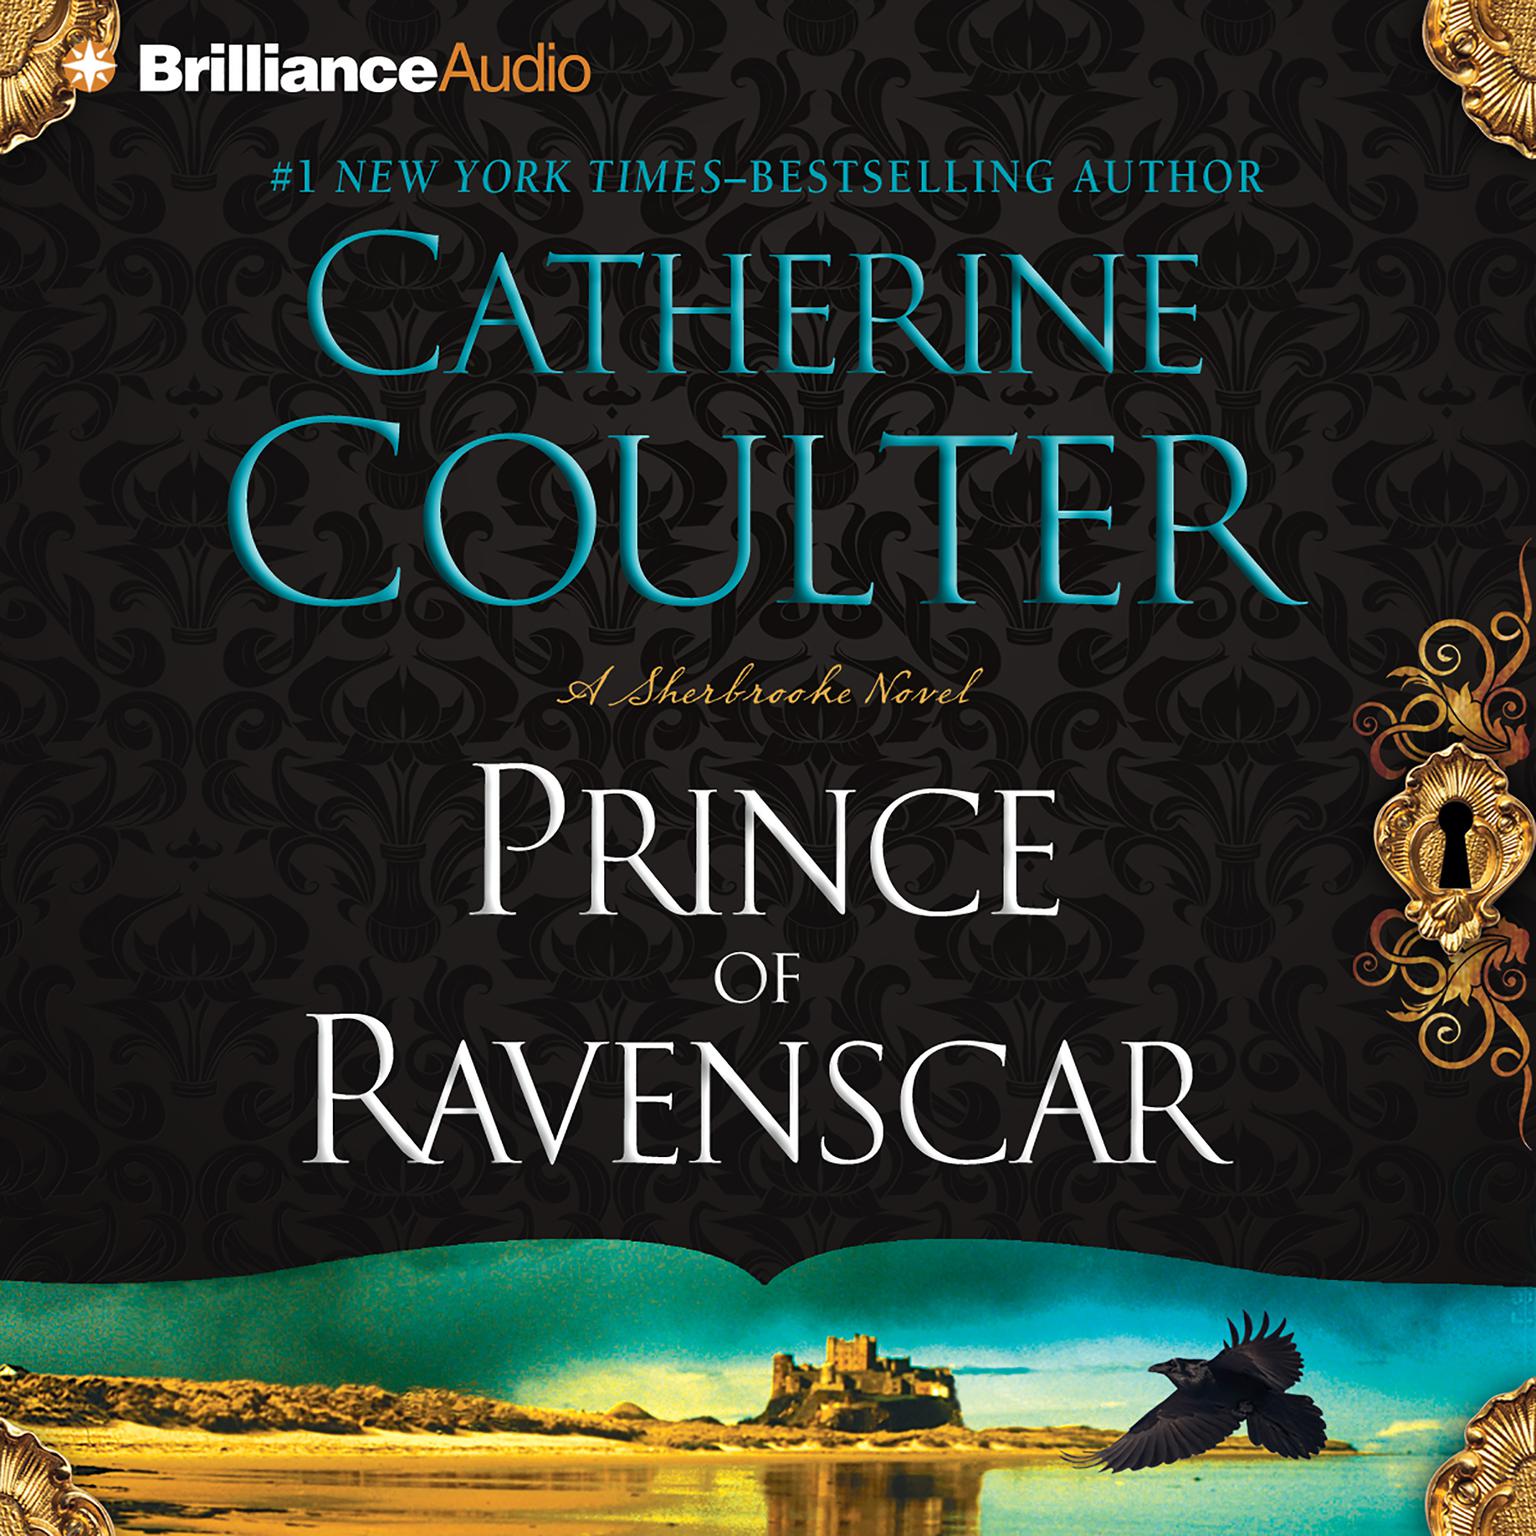 Prince of Ravenscar (Abridged) Audiobook, by Catherine Coulter